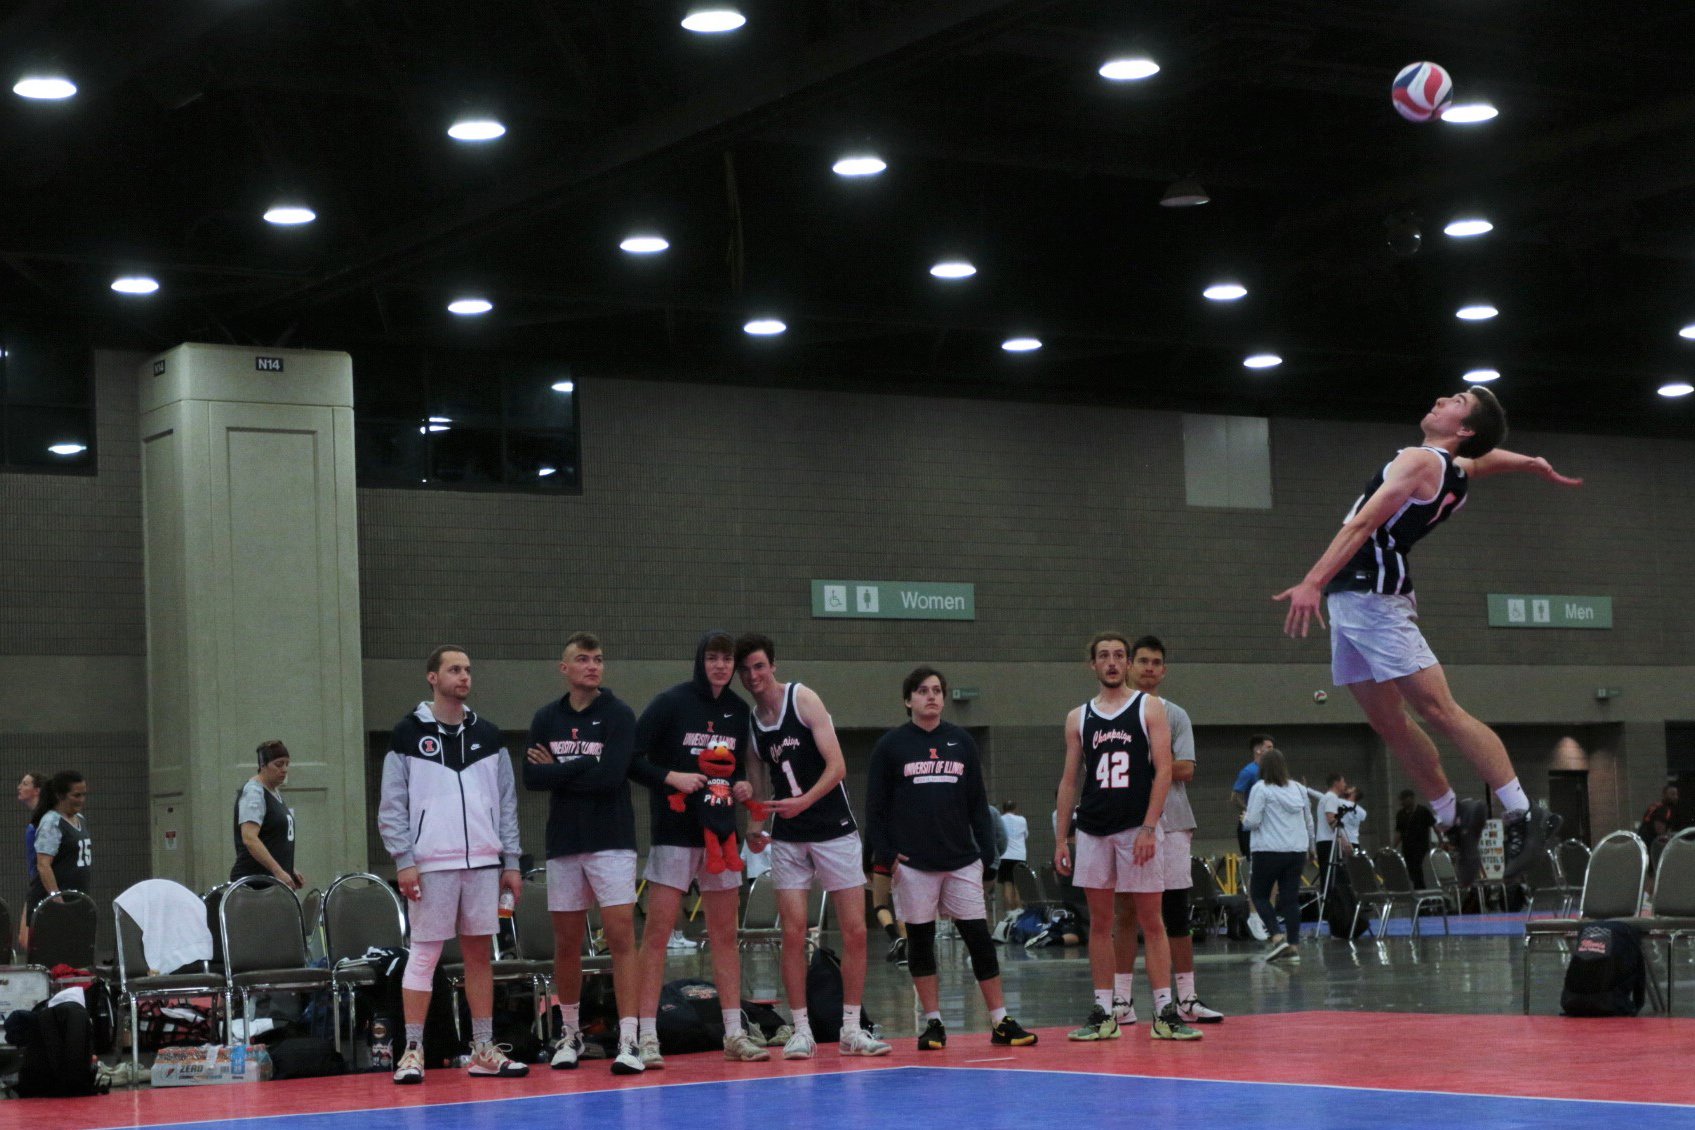 2021 USA Volleyball Open National Championship man serving